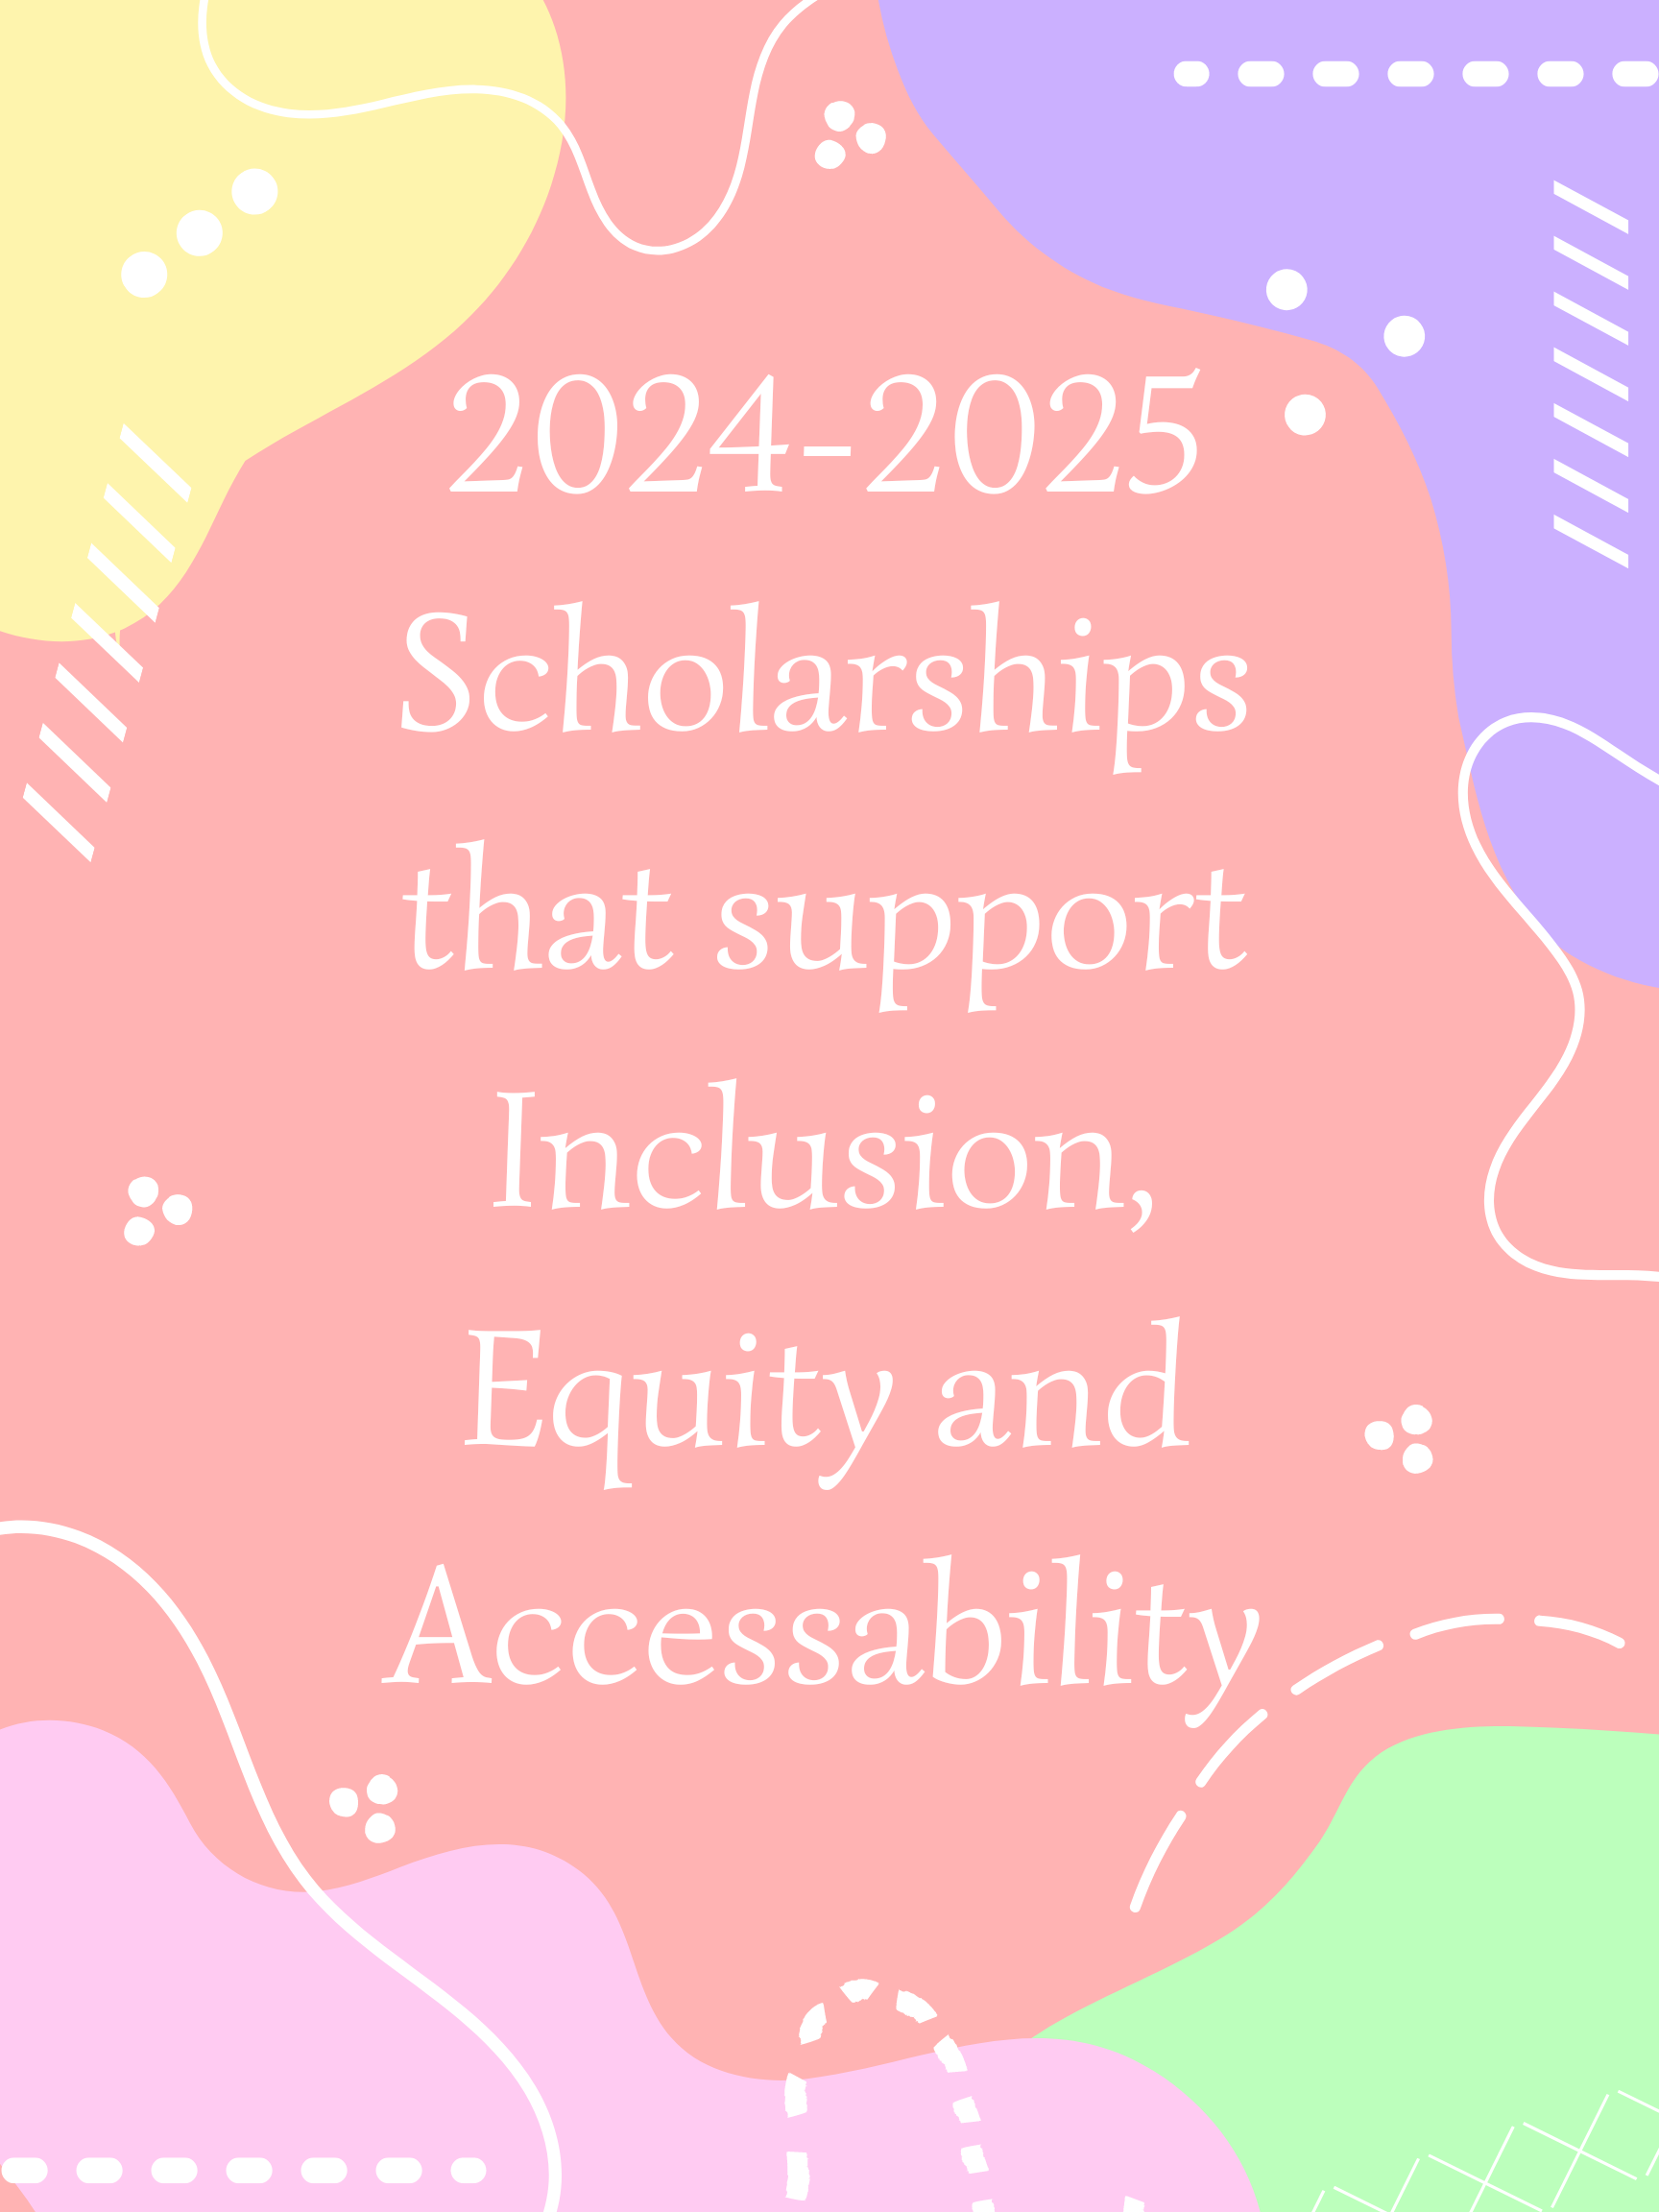 You are currently viewing 2024 Scholarships that Support Equity, Accessibility, and Inclusion